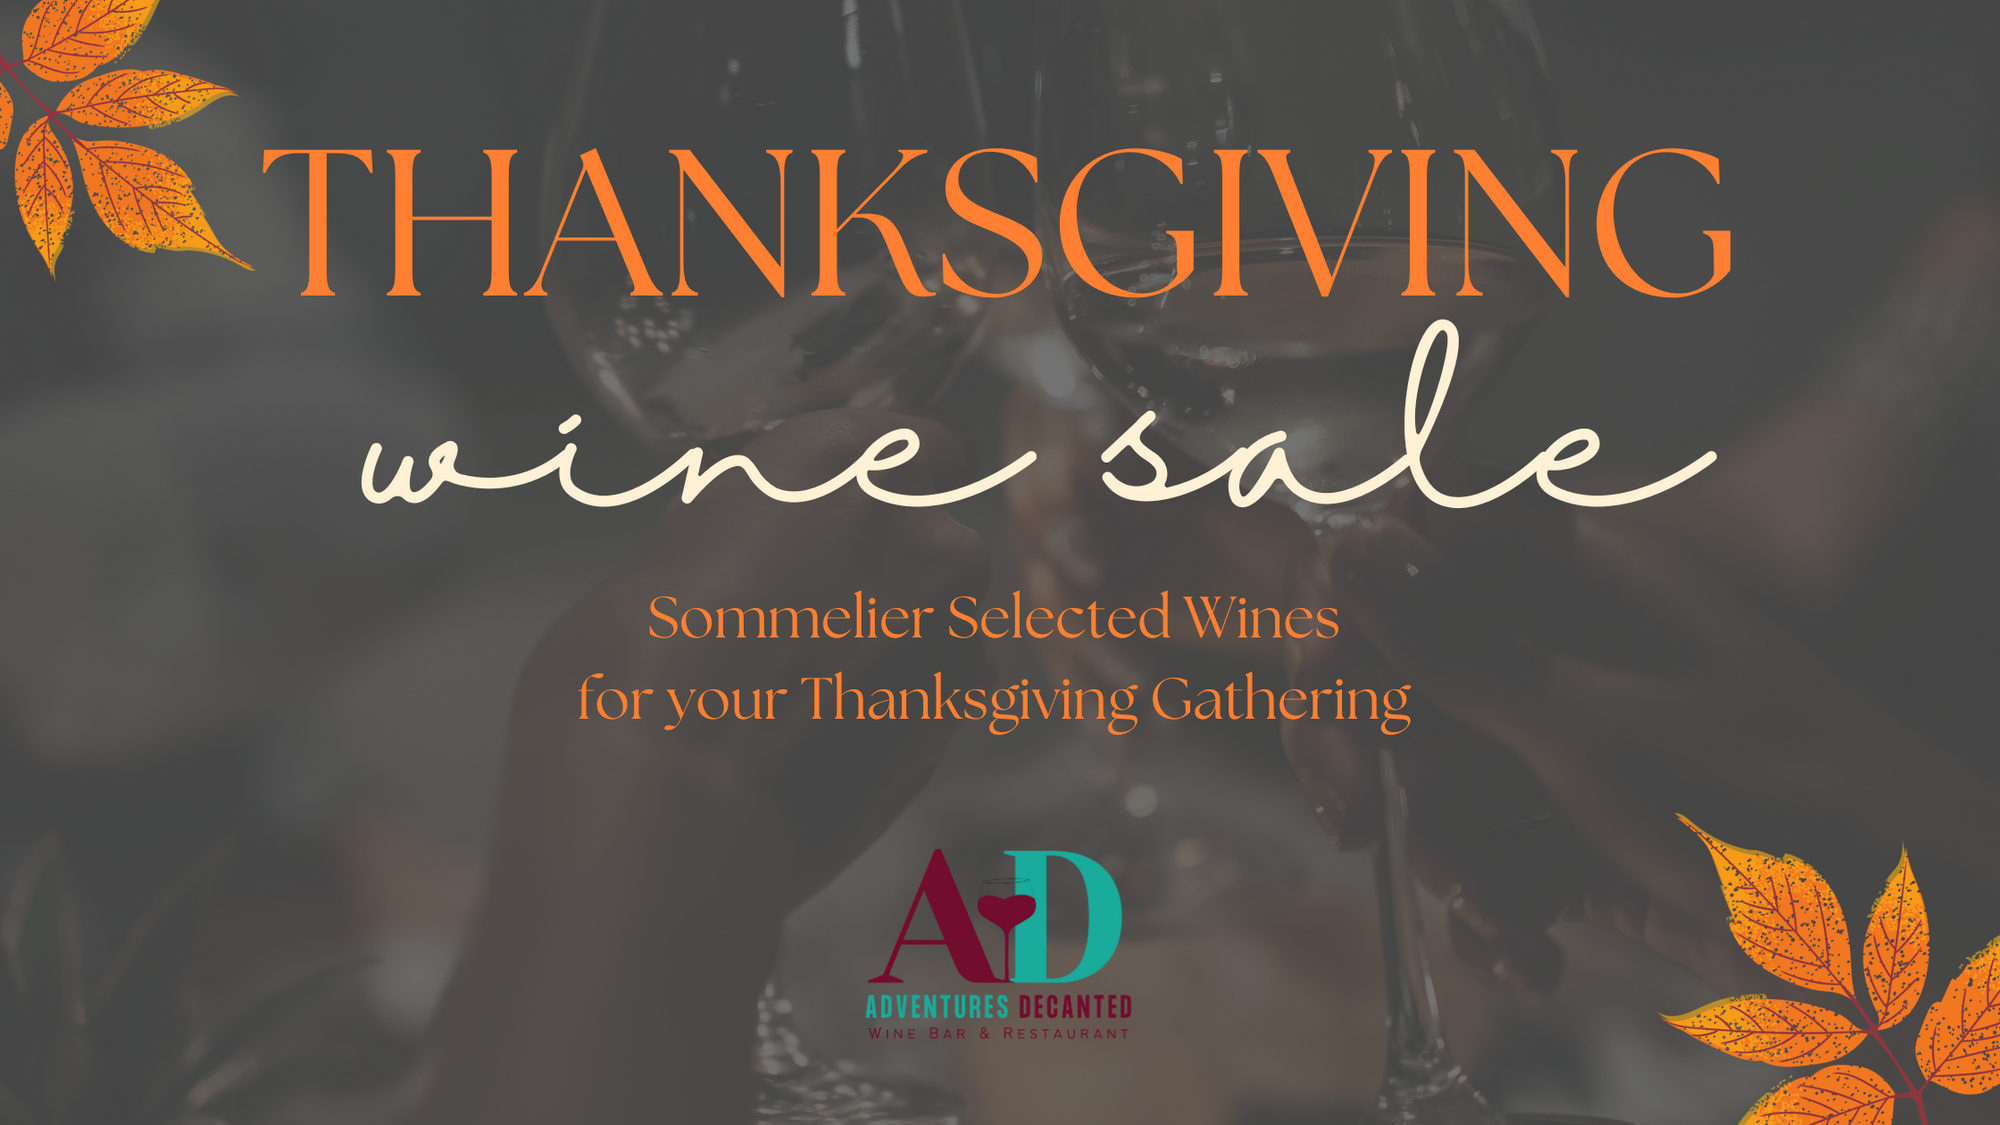 Thanksgiving Wine Sale: Sommelier Selected Wines for your Thanksgiving Gathering